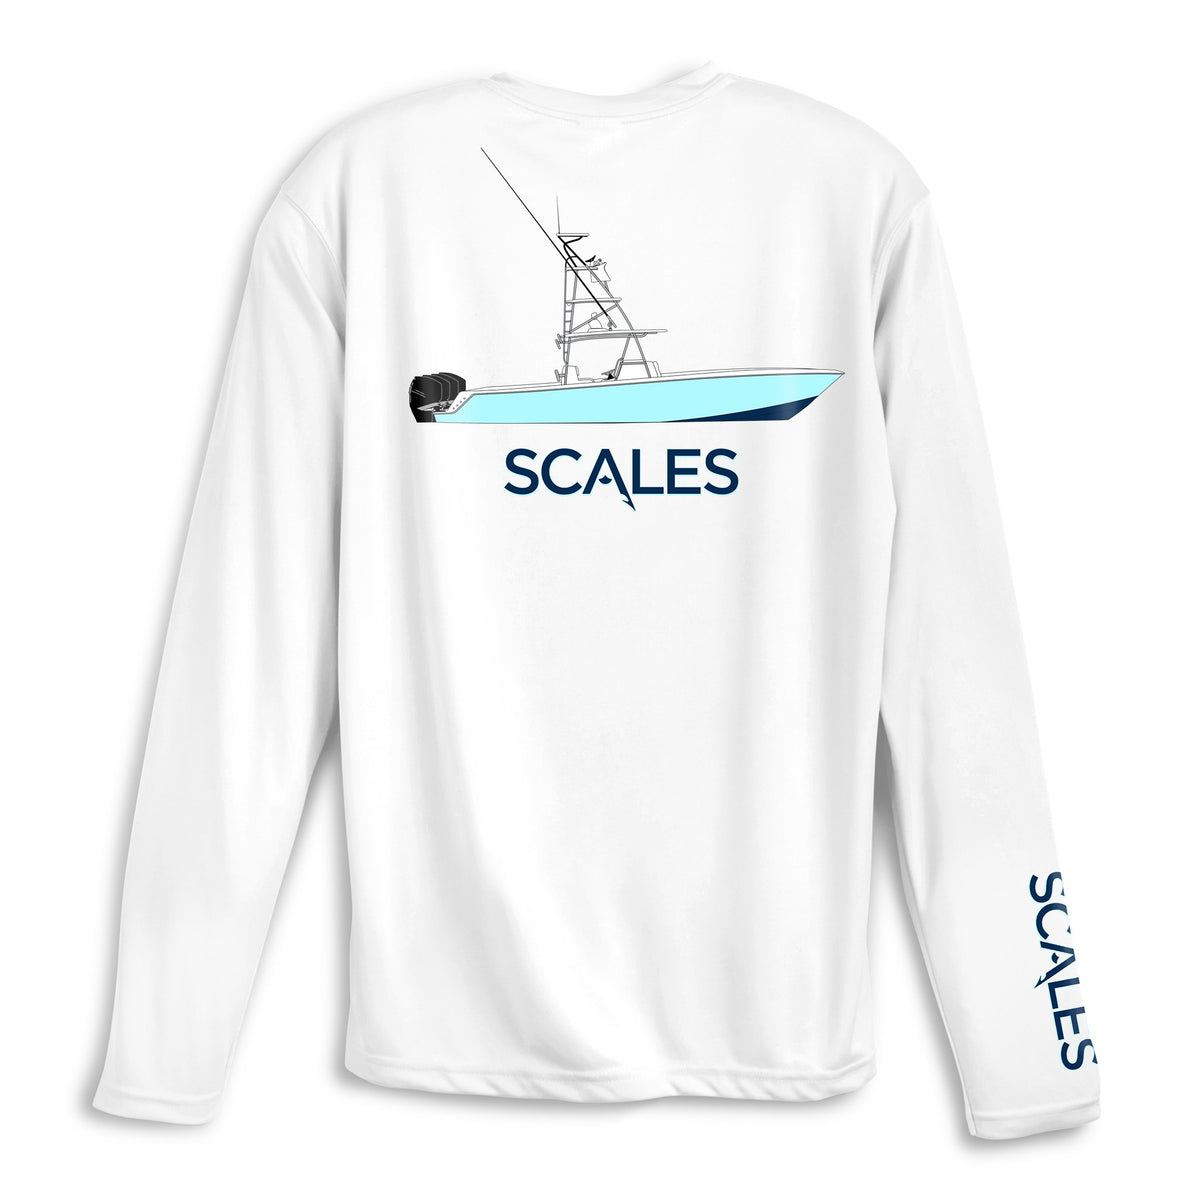 SCALES Team Scales Long Sleeve Performance